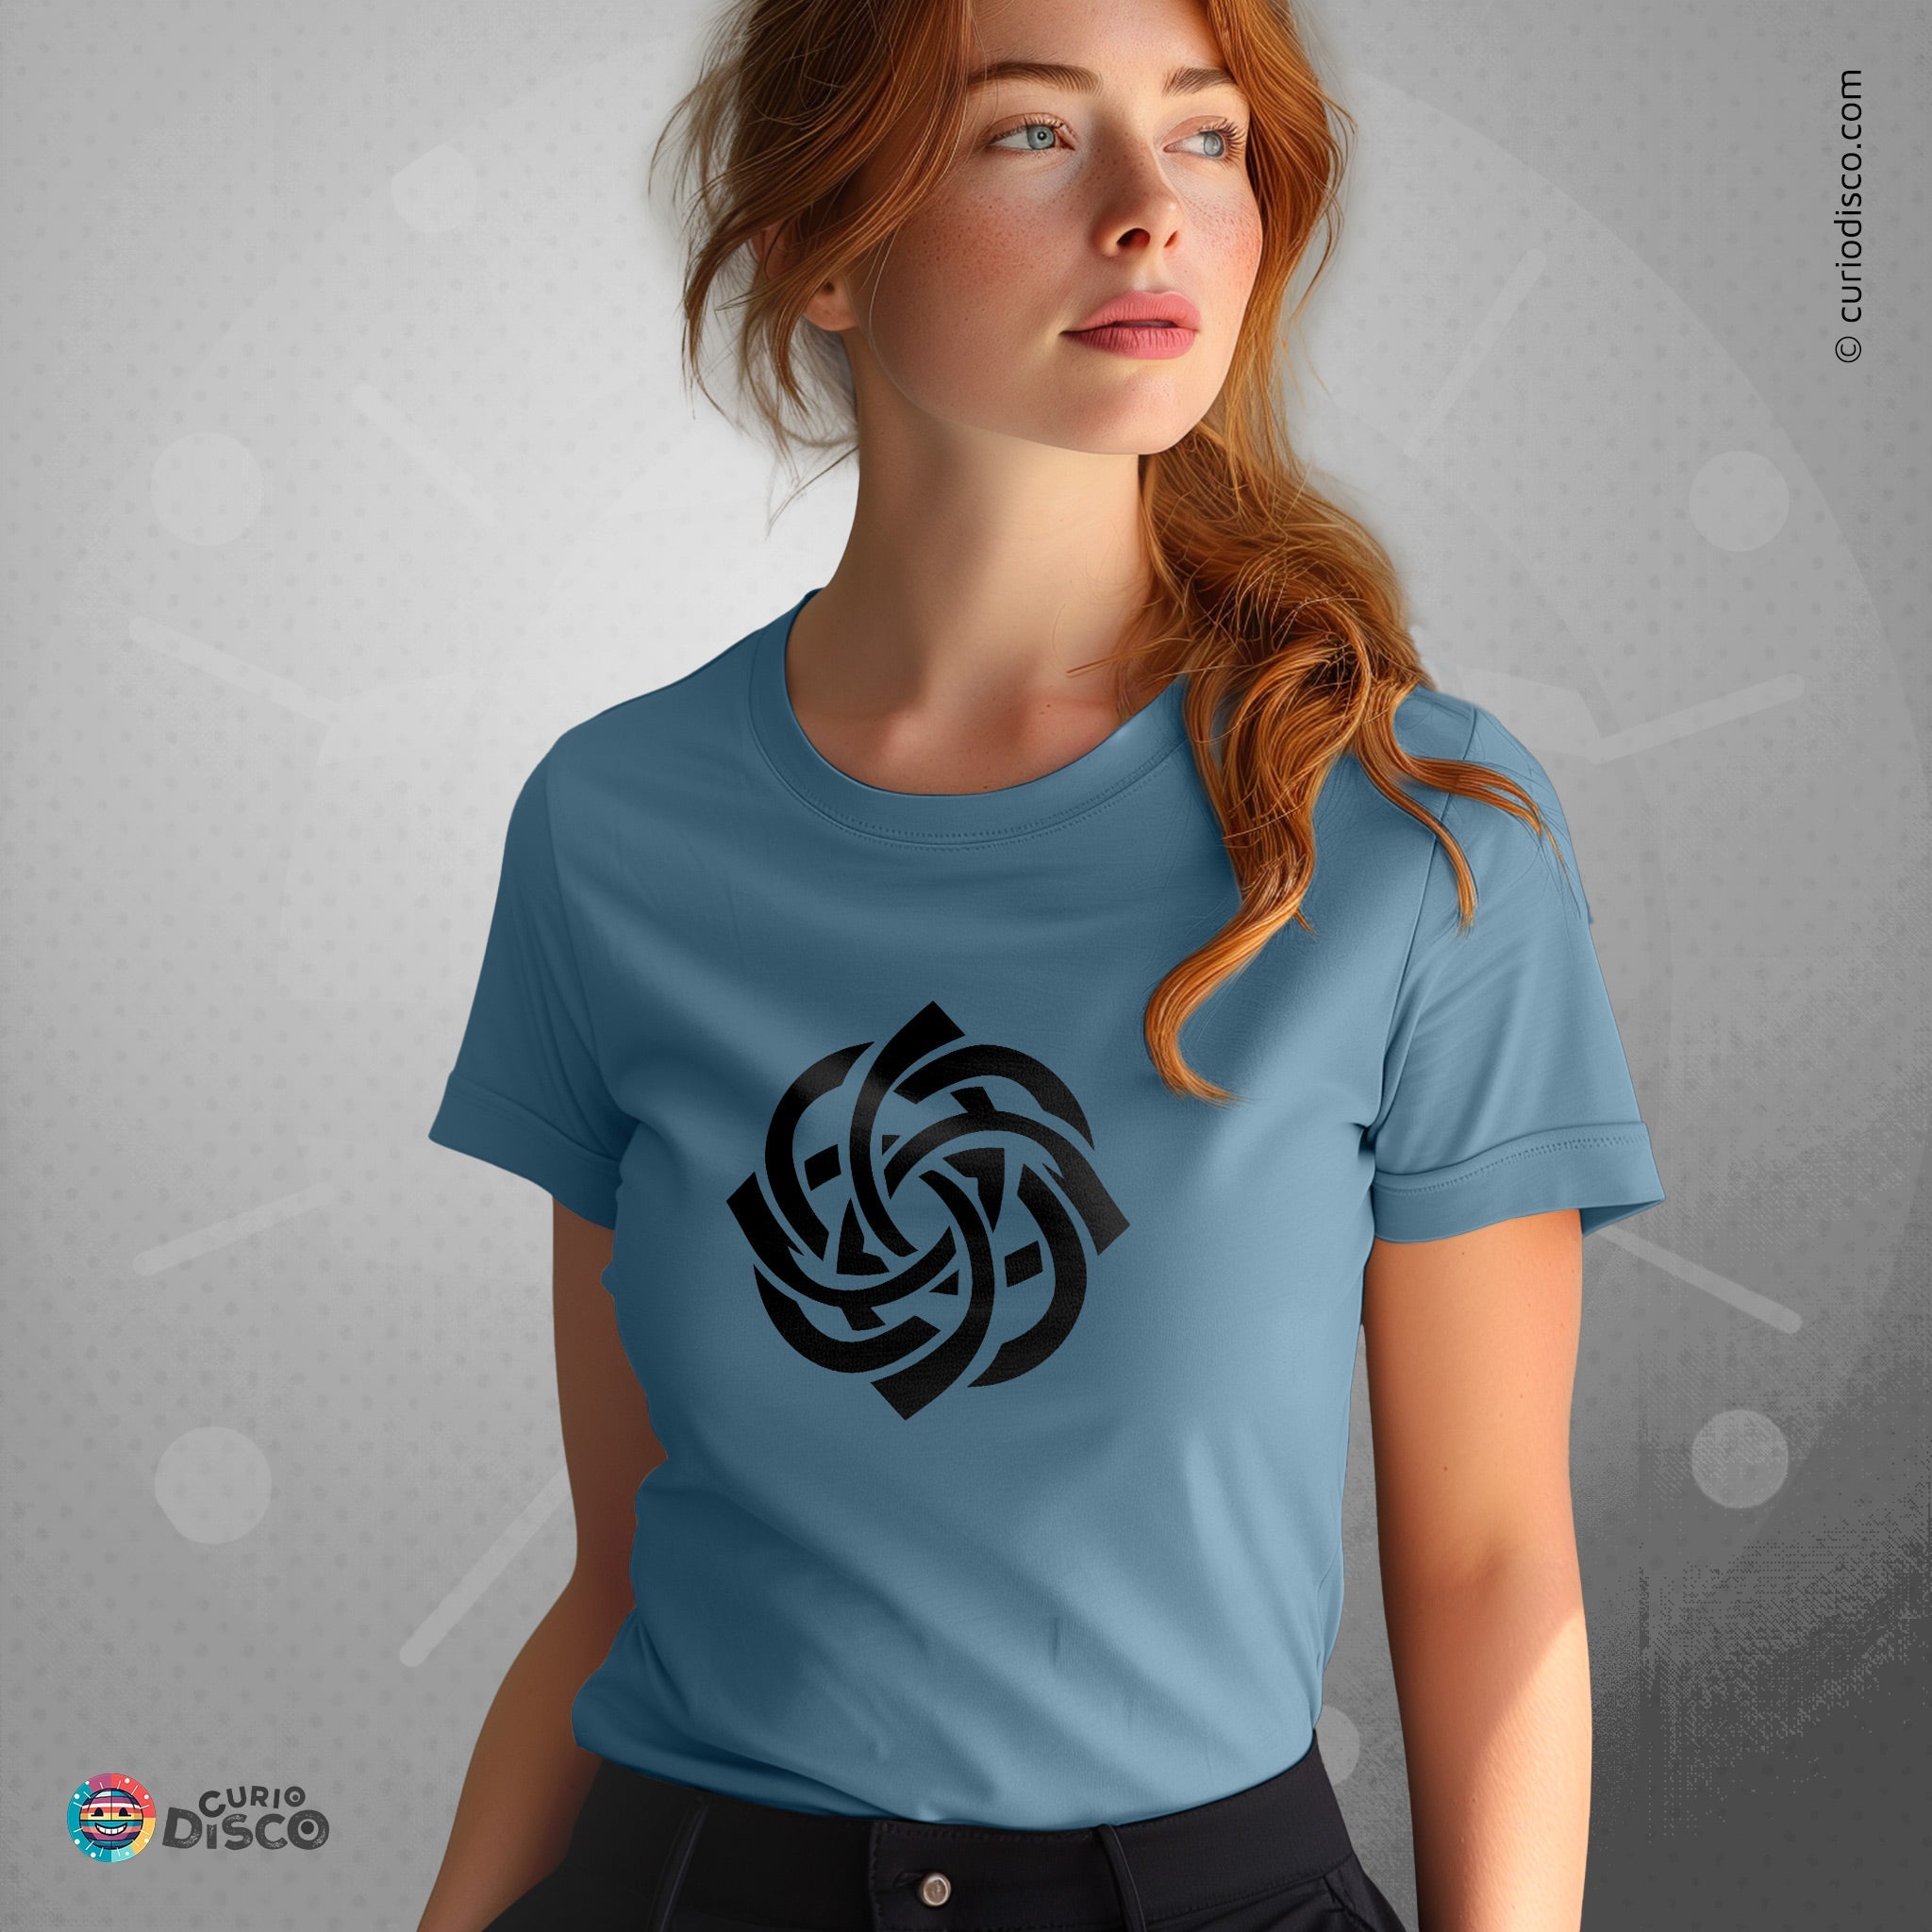 Steel blue tree of life yoga shirt with celtic knot, ideal as love knot viking nordic celtic gifts, gifts for wife, yoga gifts for her, plus size clothing for mystical cottage core workout, and gifts for mom.